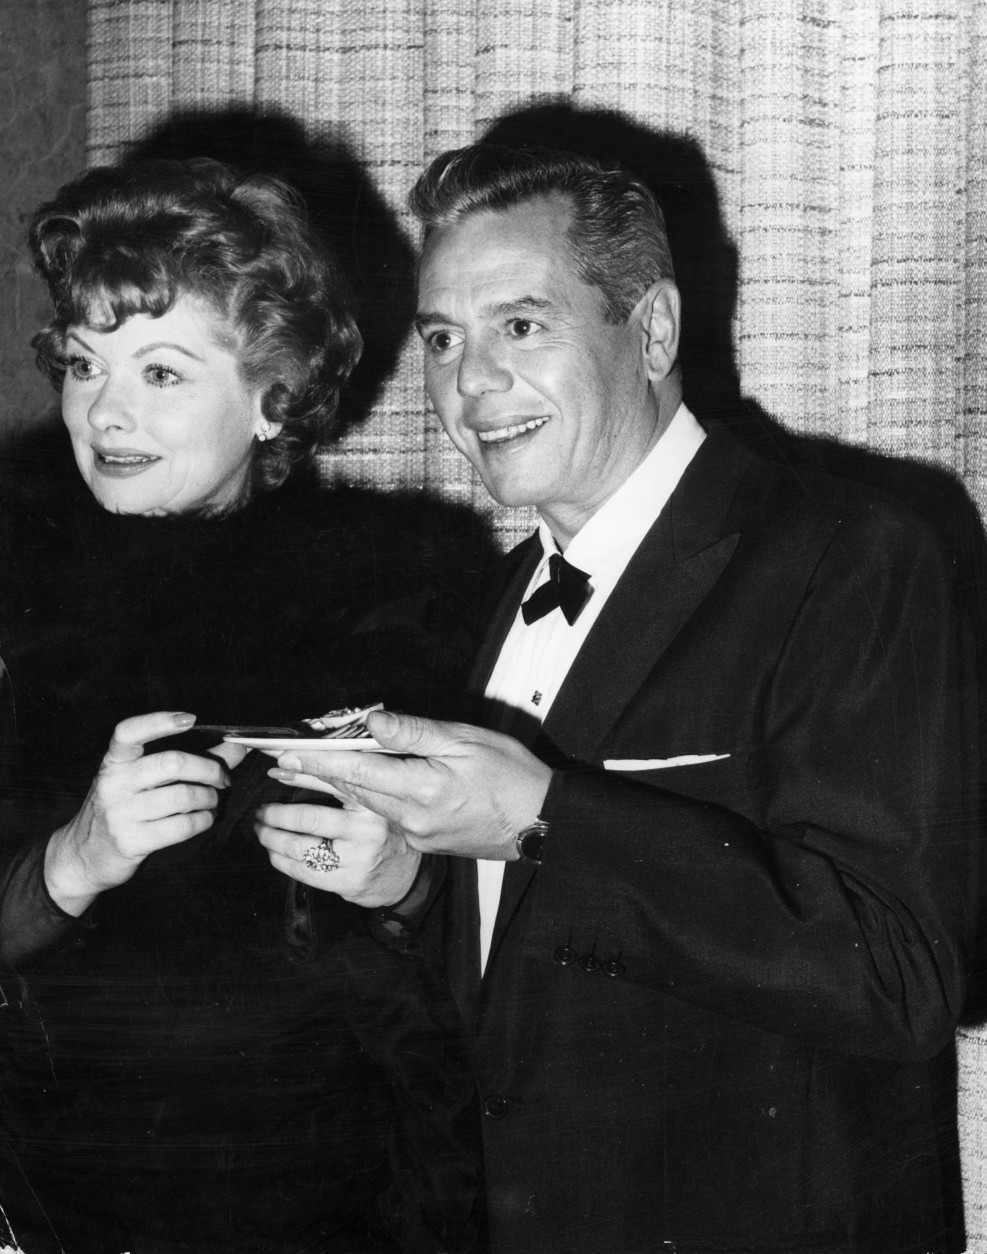 circa 1955:  American actress Lucille Ball (1911 - 1989) with her Cuban husband and co-star of the popular TV show 'I Love Lucy', Desi Arnaz (1917 - 1986). The celebrity couple set up the Desilu Studios together.  (Photo by Keystone/Getty Images)